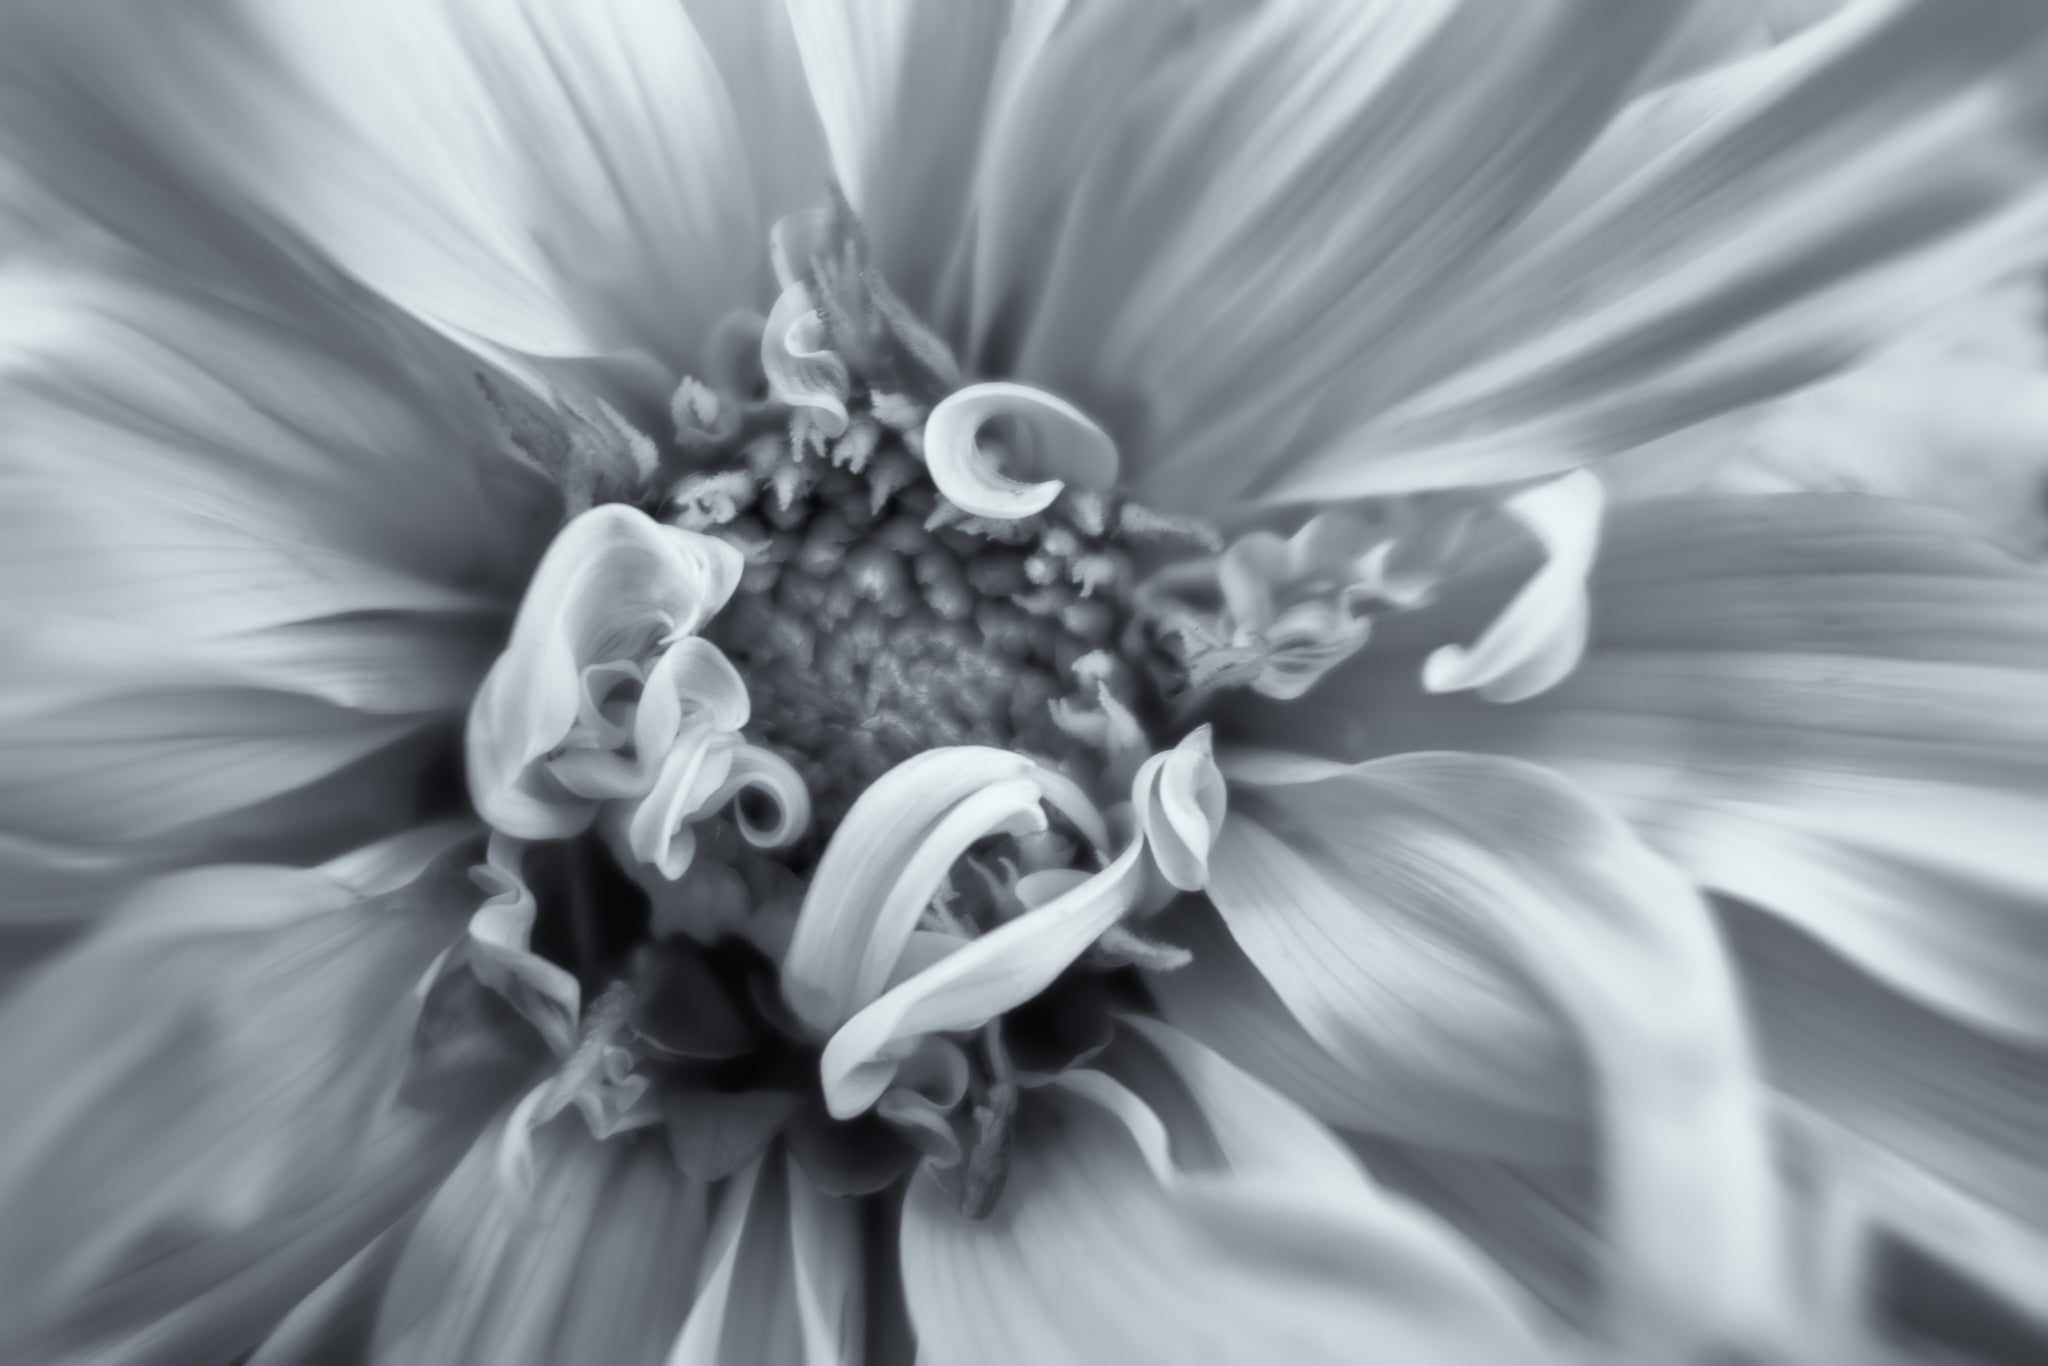 Black and white flower photograph of a dahlia flower titled "A Dash of Elegance" by Cameron Dreaux of Dreaux Fine Art.